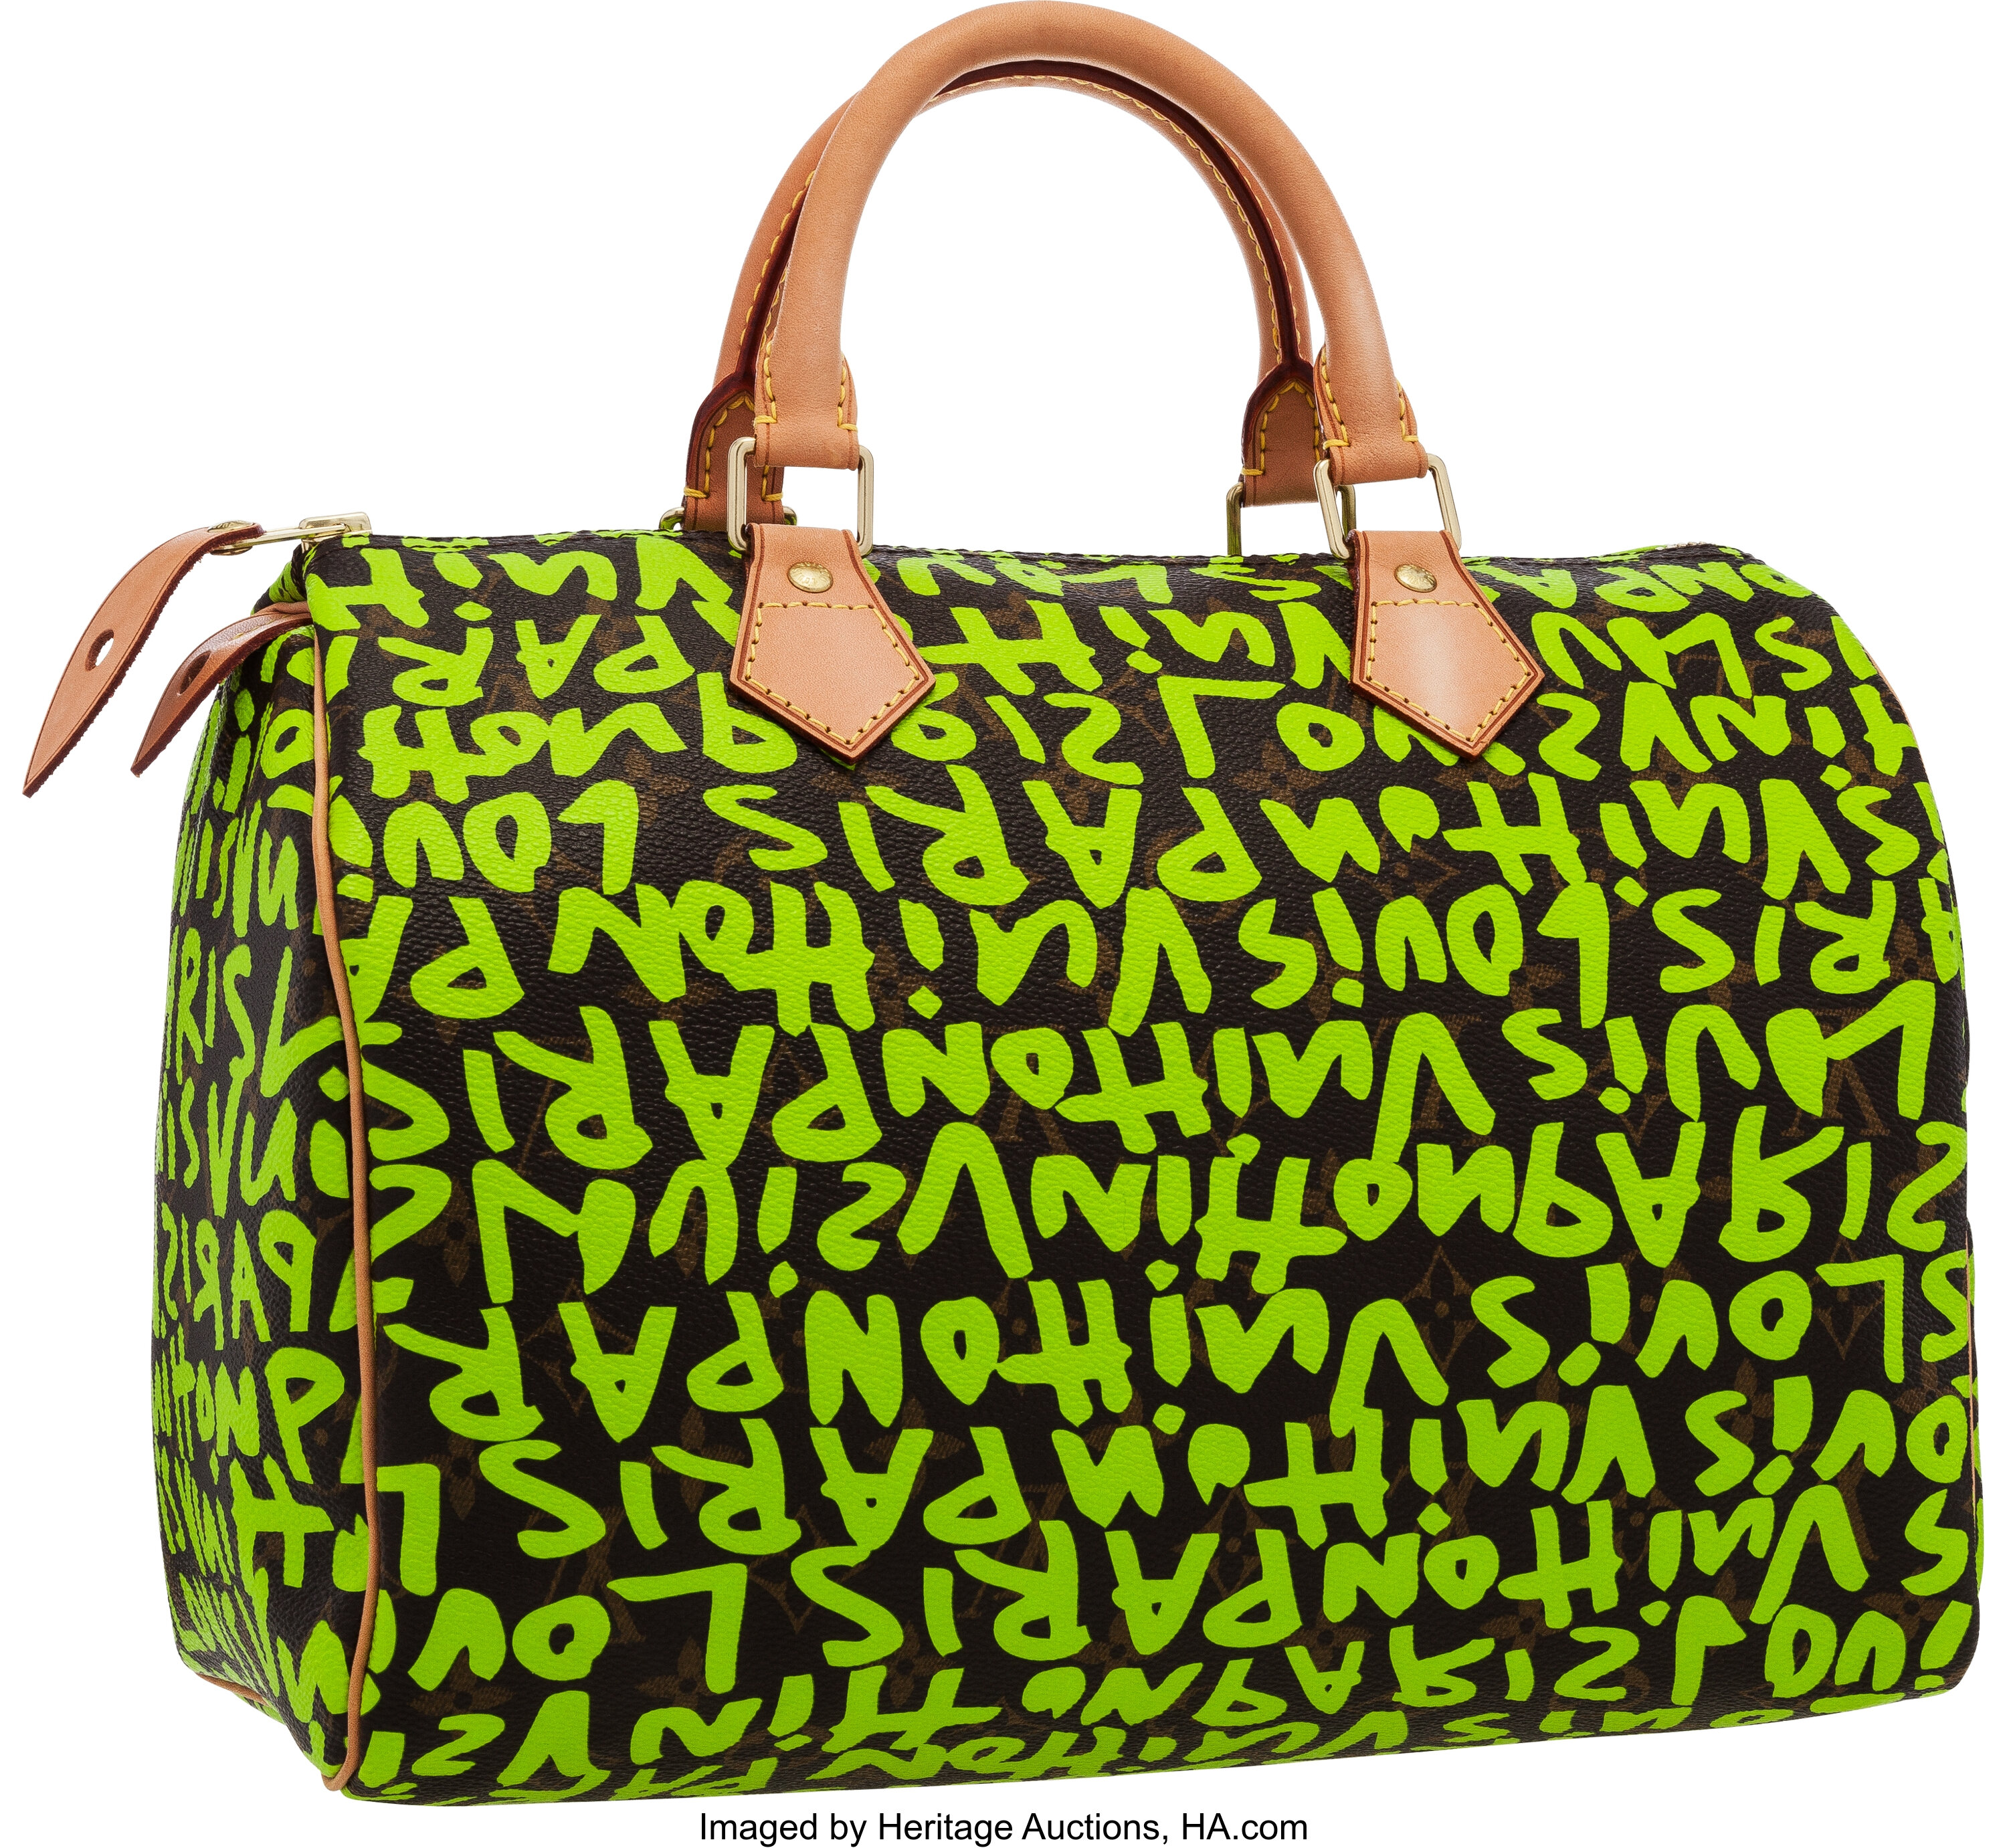 Facts About Fake Louis Vuitton Bags - 360 MAGAZINE - GREEN